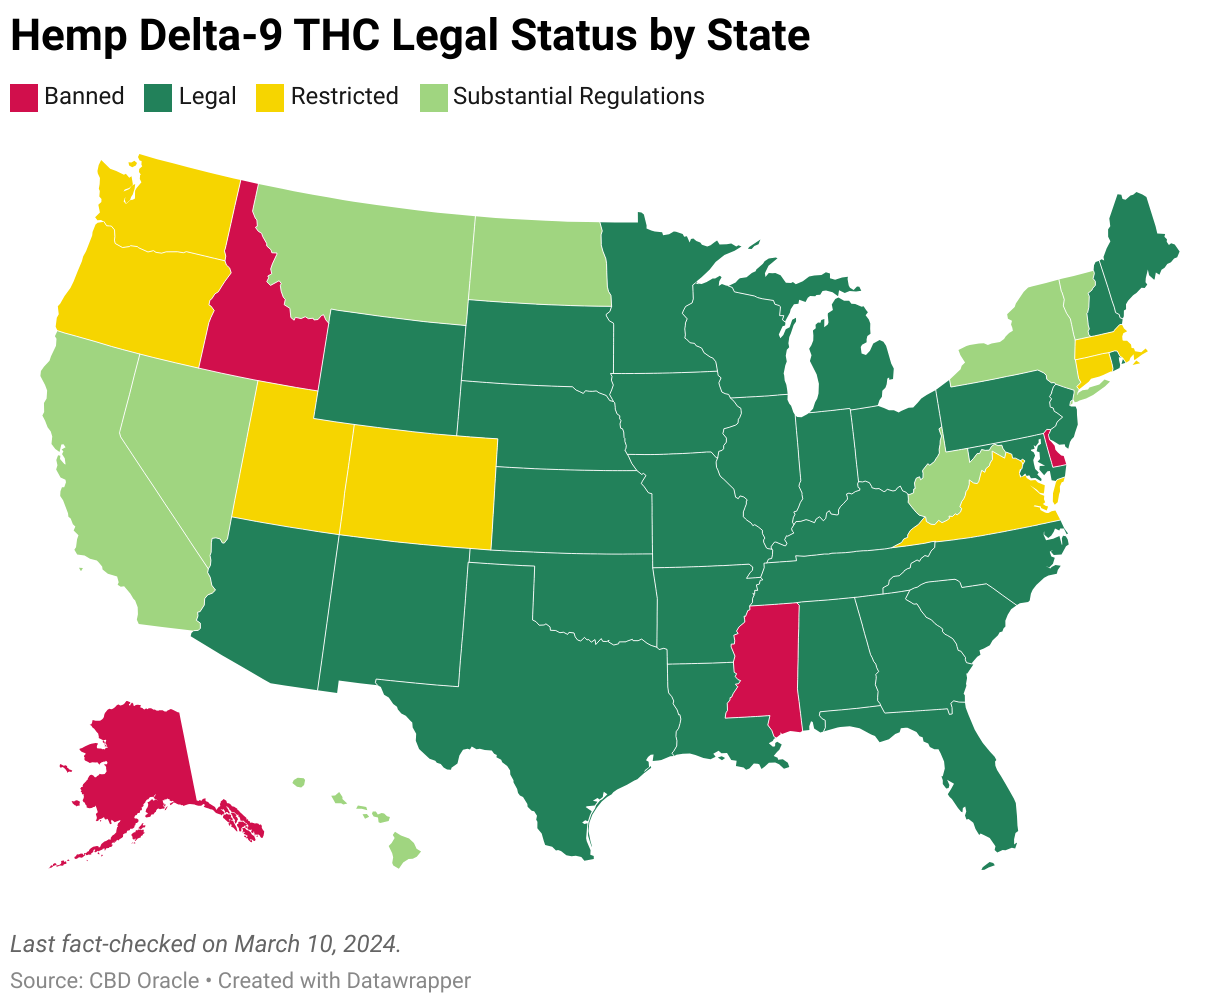 A state-by-state guide to the legal status of hemp delta-9 THC. 